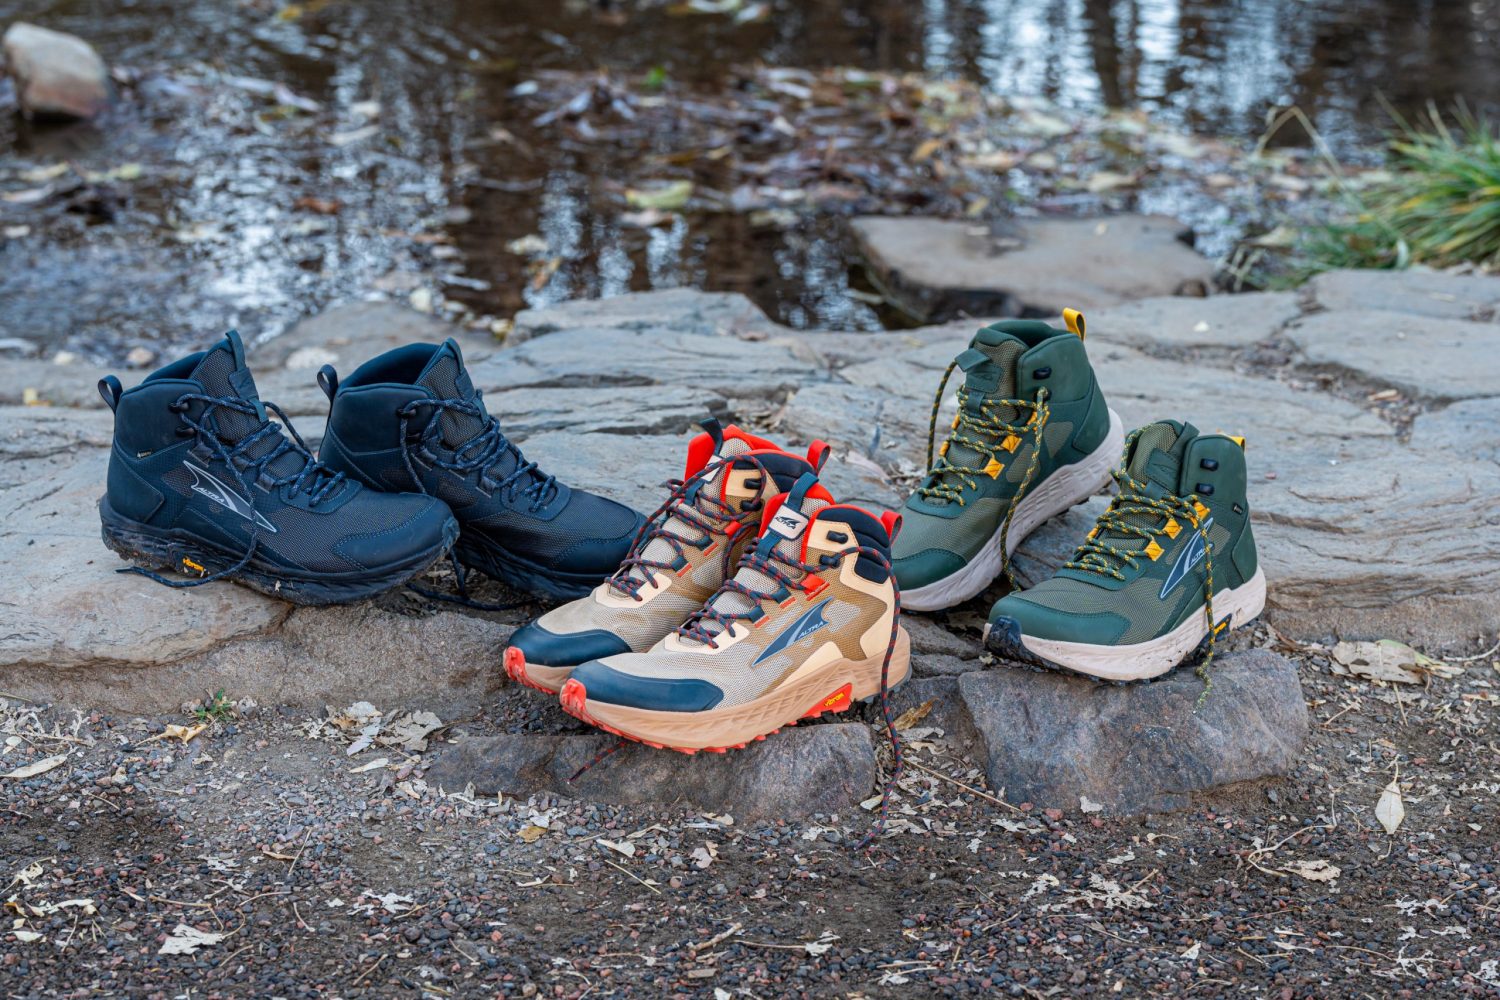 Altra Announces Expansion of the Timp Family with the New Timp Hiker ...